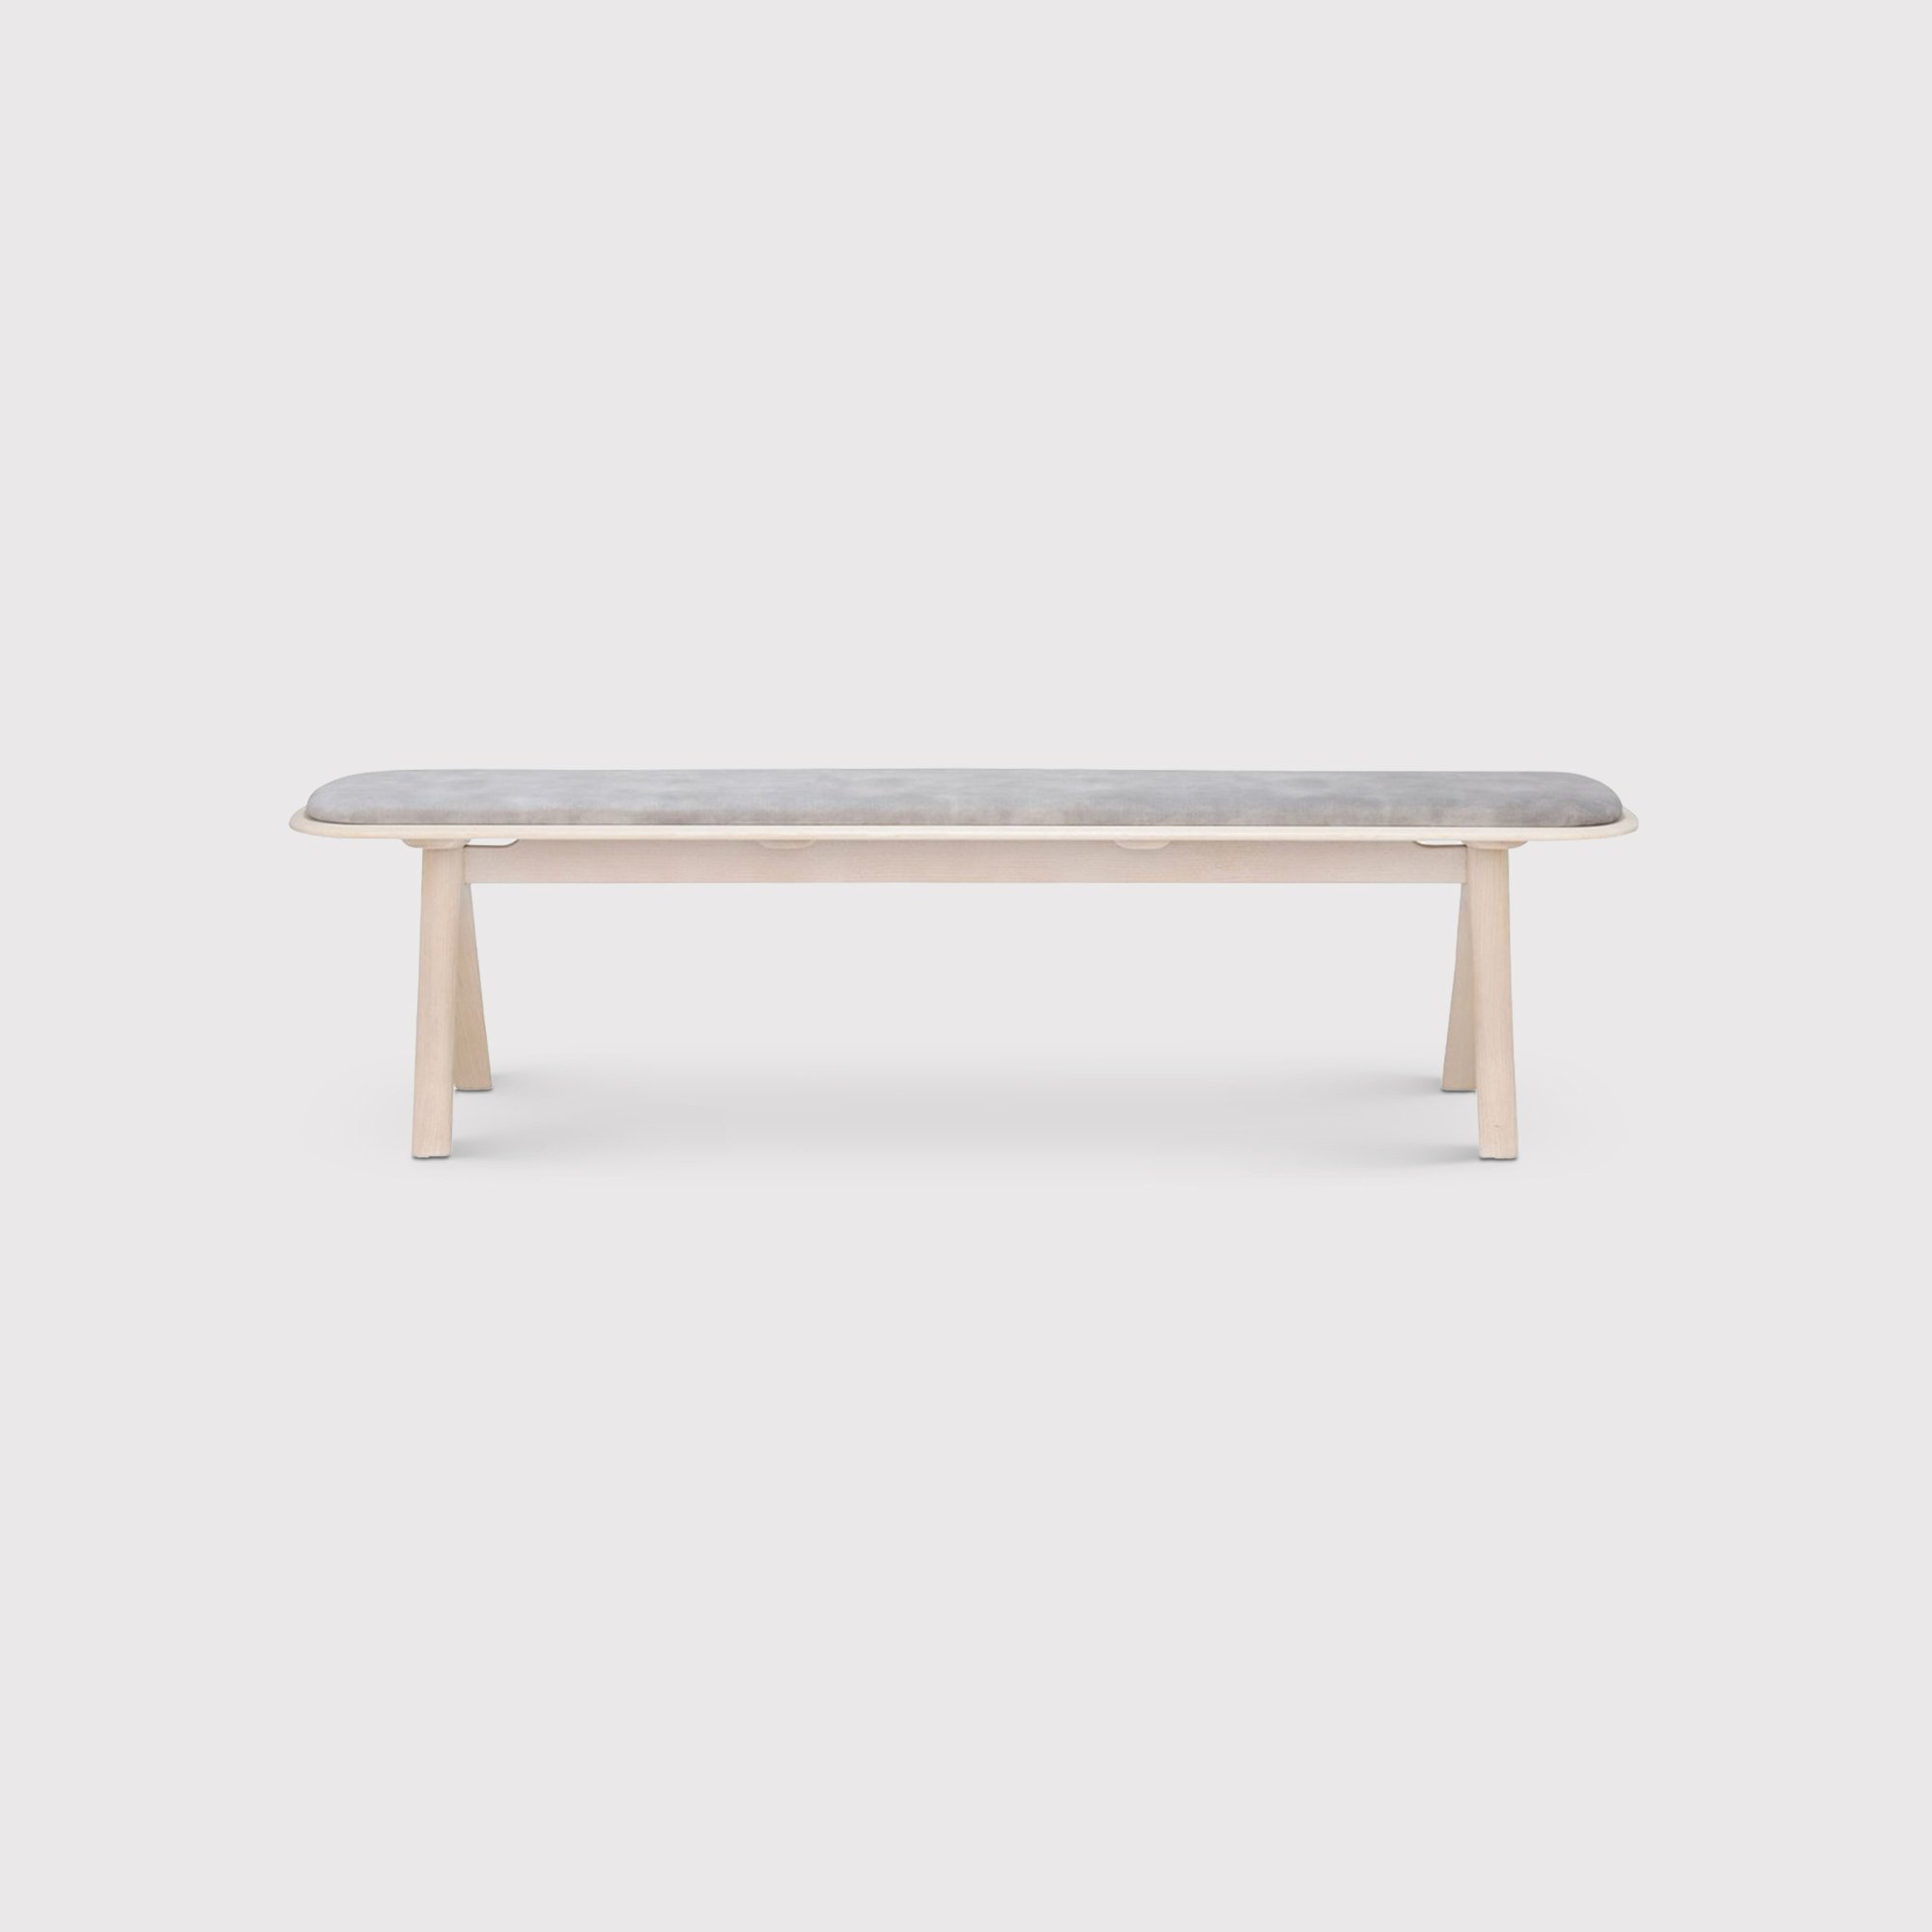 Ercol Corso Upholstered Bench, Neutral | Barker & Stonehouse